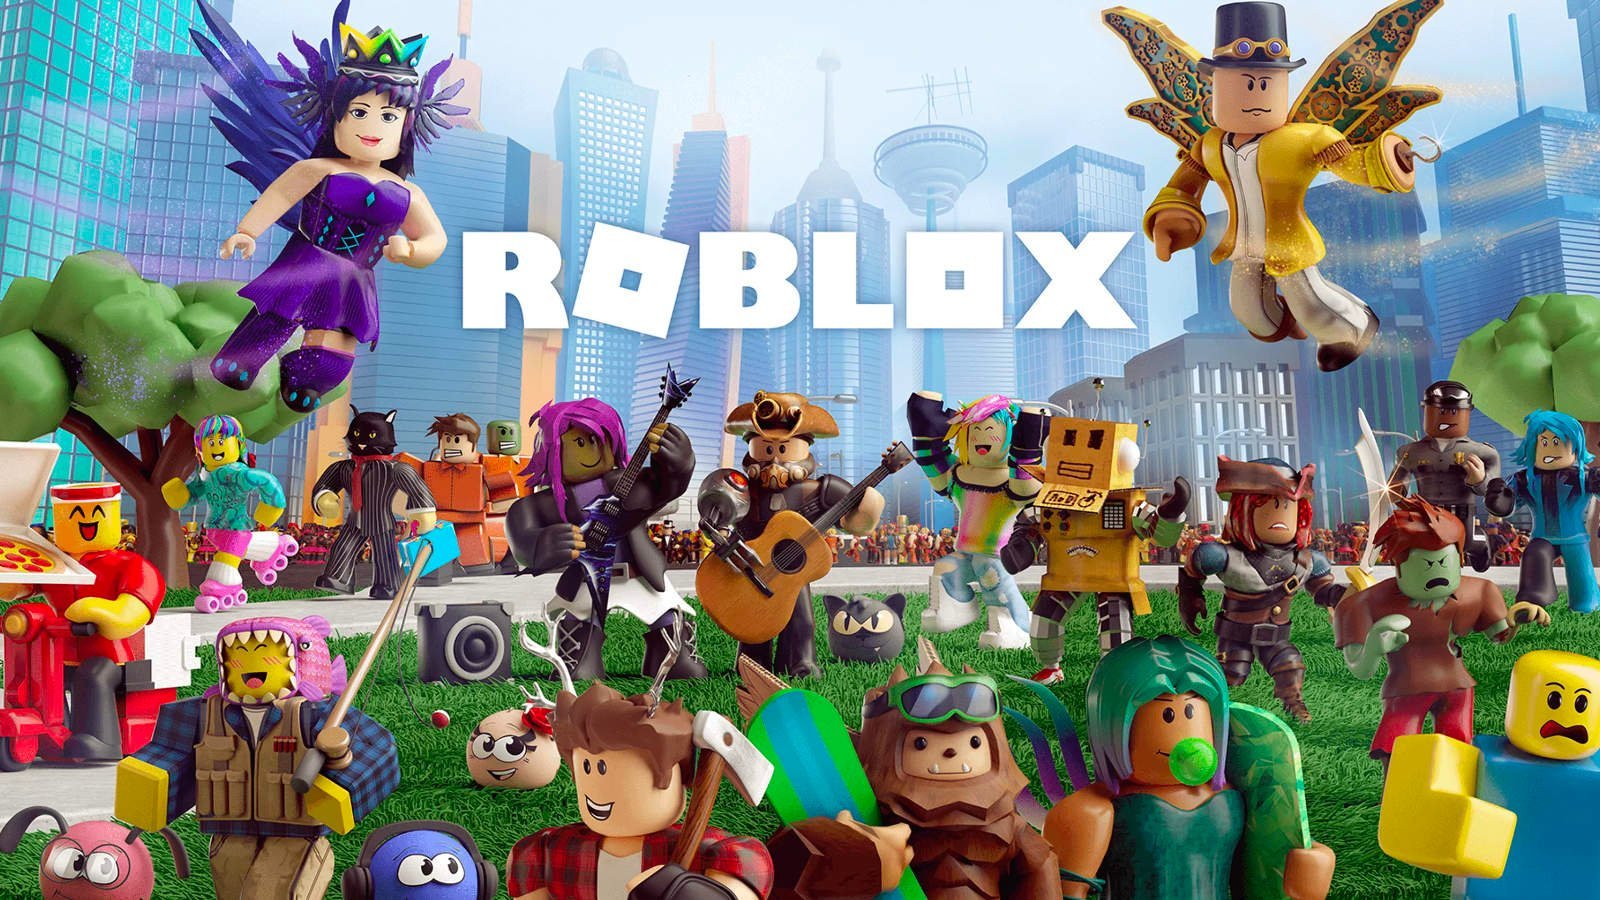 Roblox Promo Codes List Redeem Free Items Robux And Clothes - how to get free items from roblox